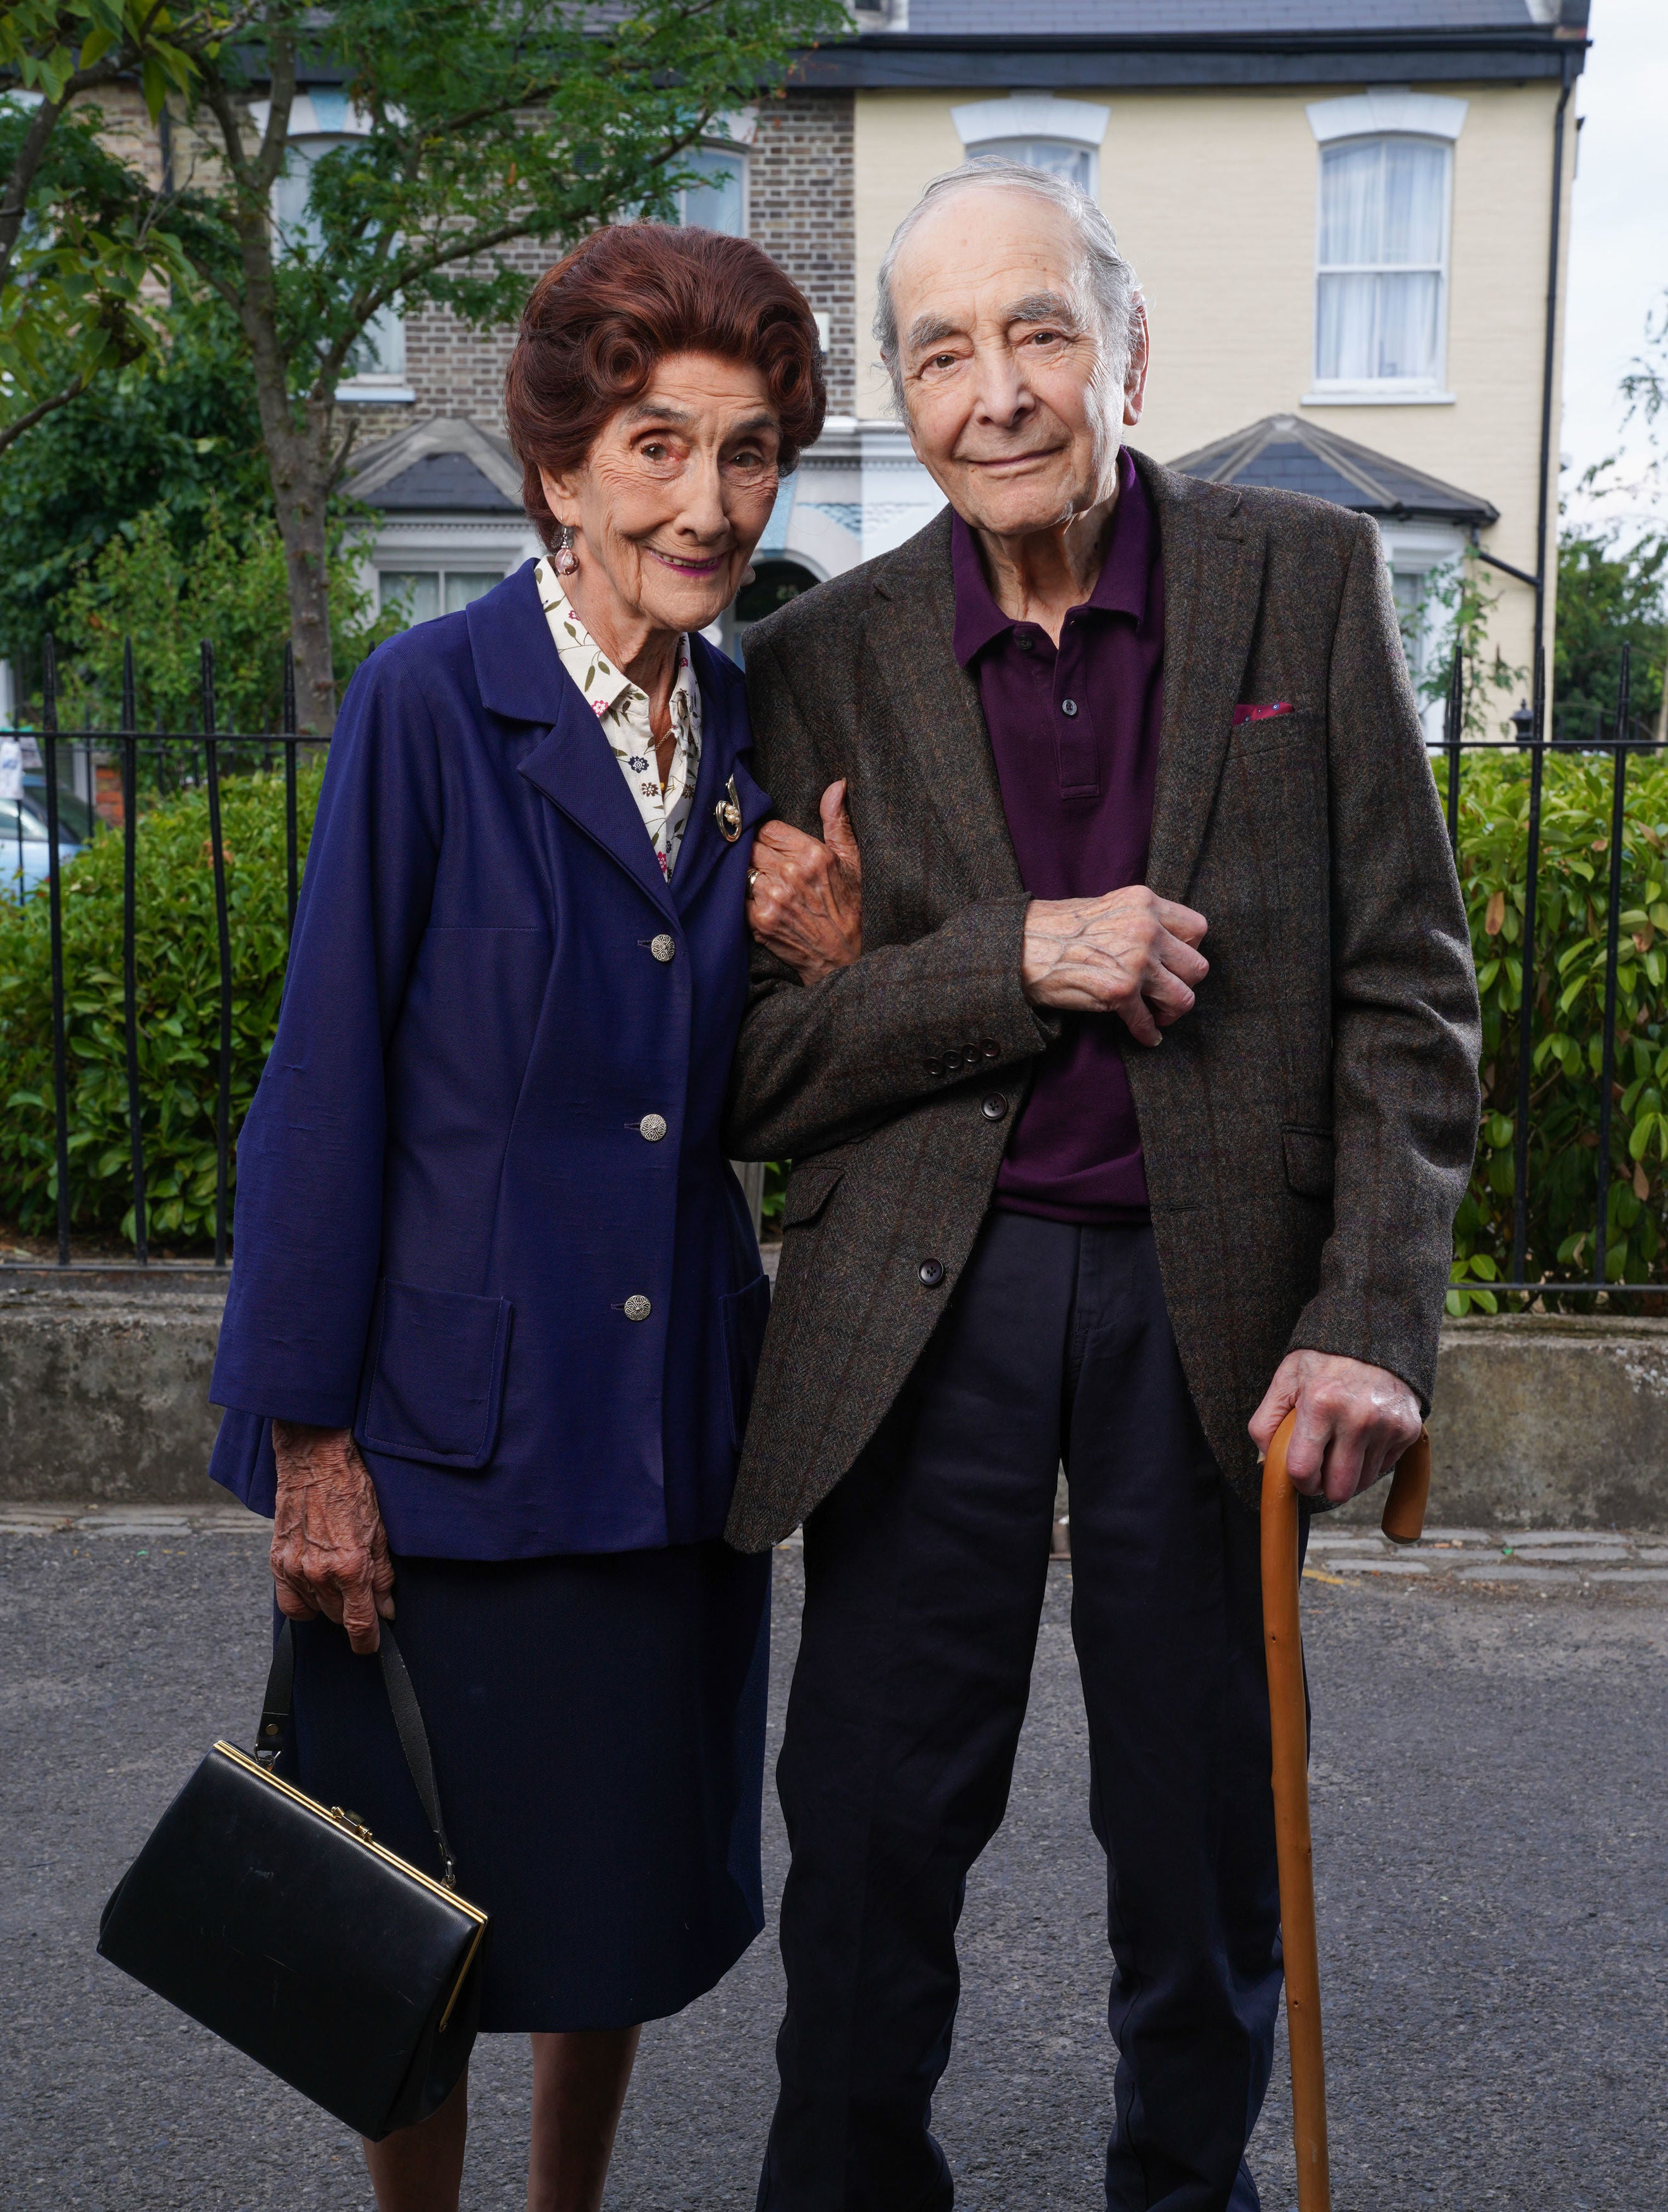 For use in UK, Ireland or Benelux countries only of EastEnders cast members Dot Cotton, played by June Brown and Dr Legg played by Leonard Fenton (BBC/PA)